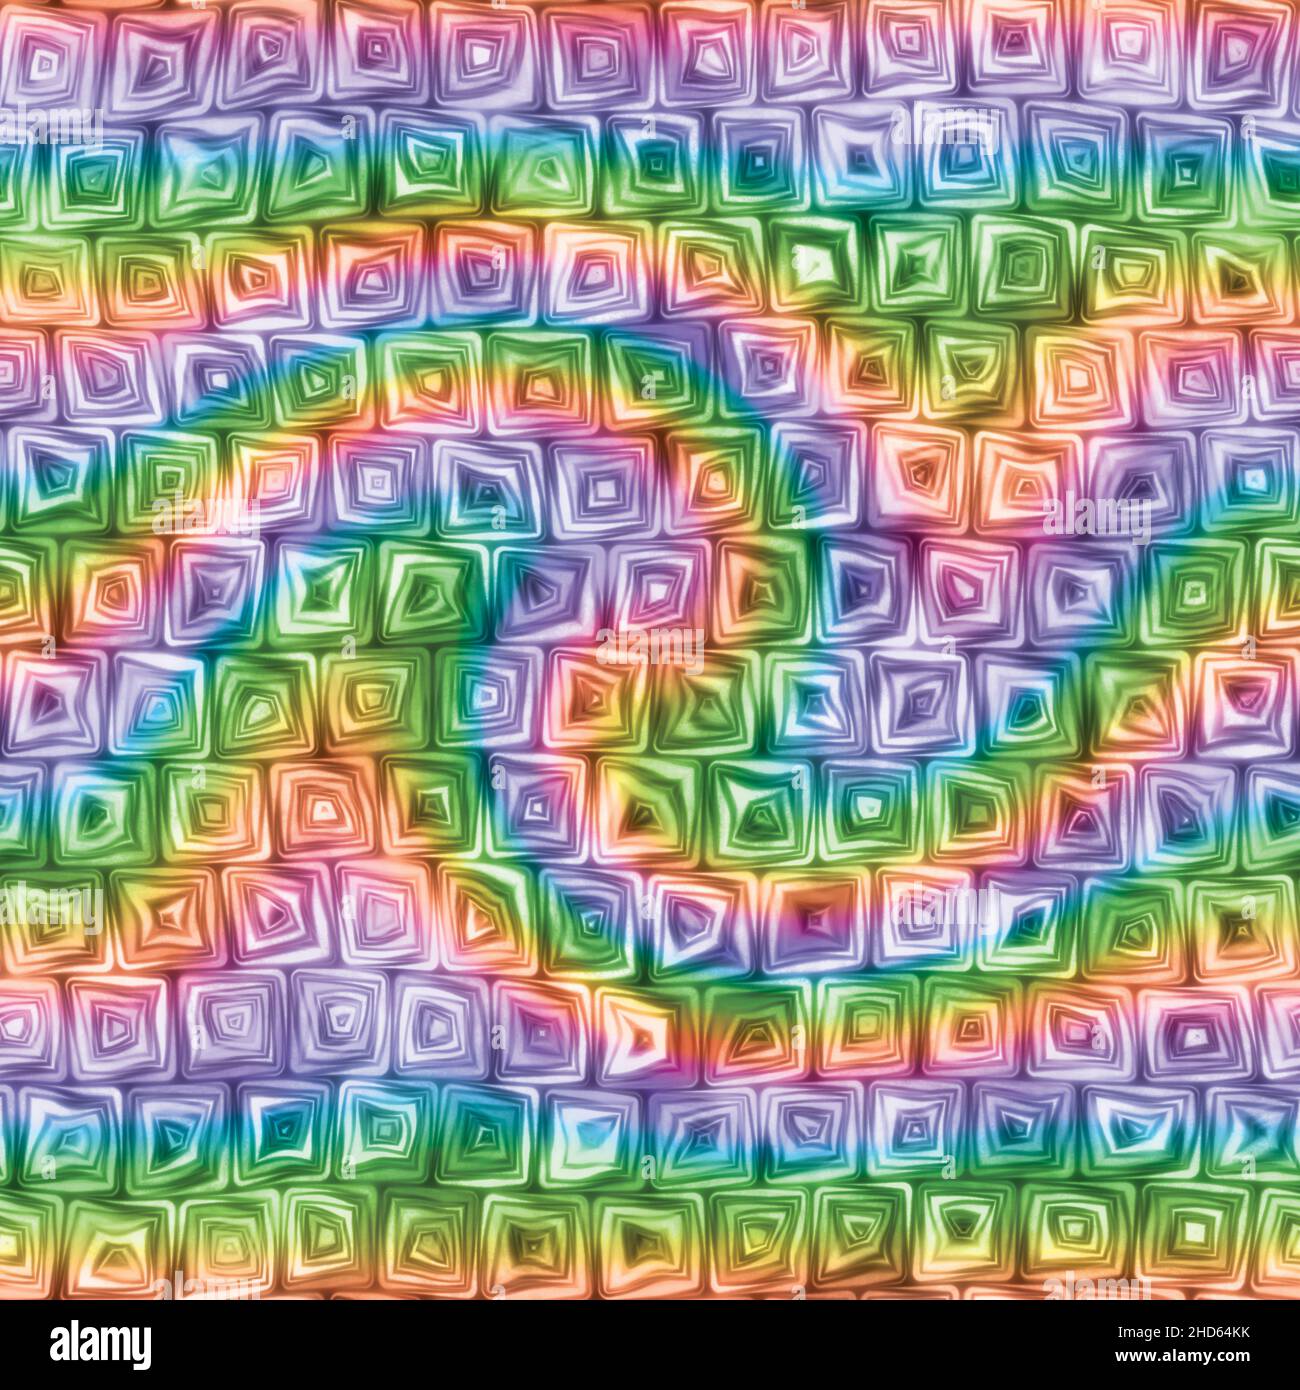 Tiny Rainbow Swirl Squiggly Swirly Spiral Squares Seamless Texture Pattern Stock Photo